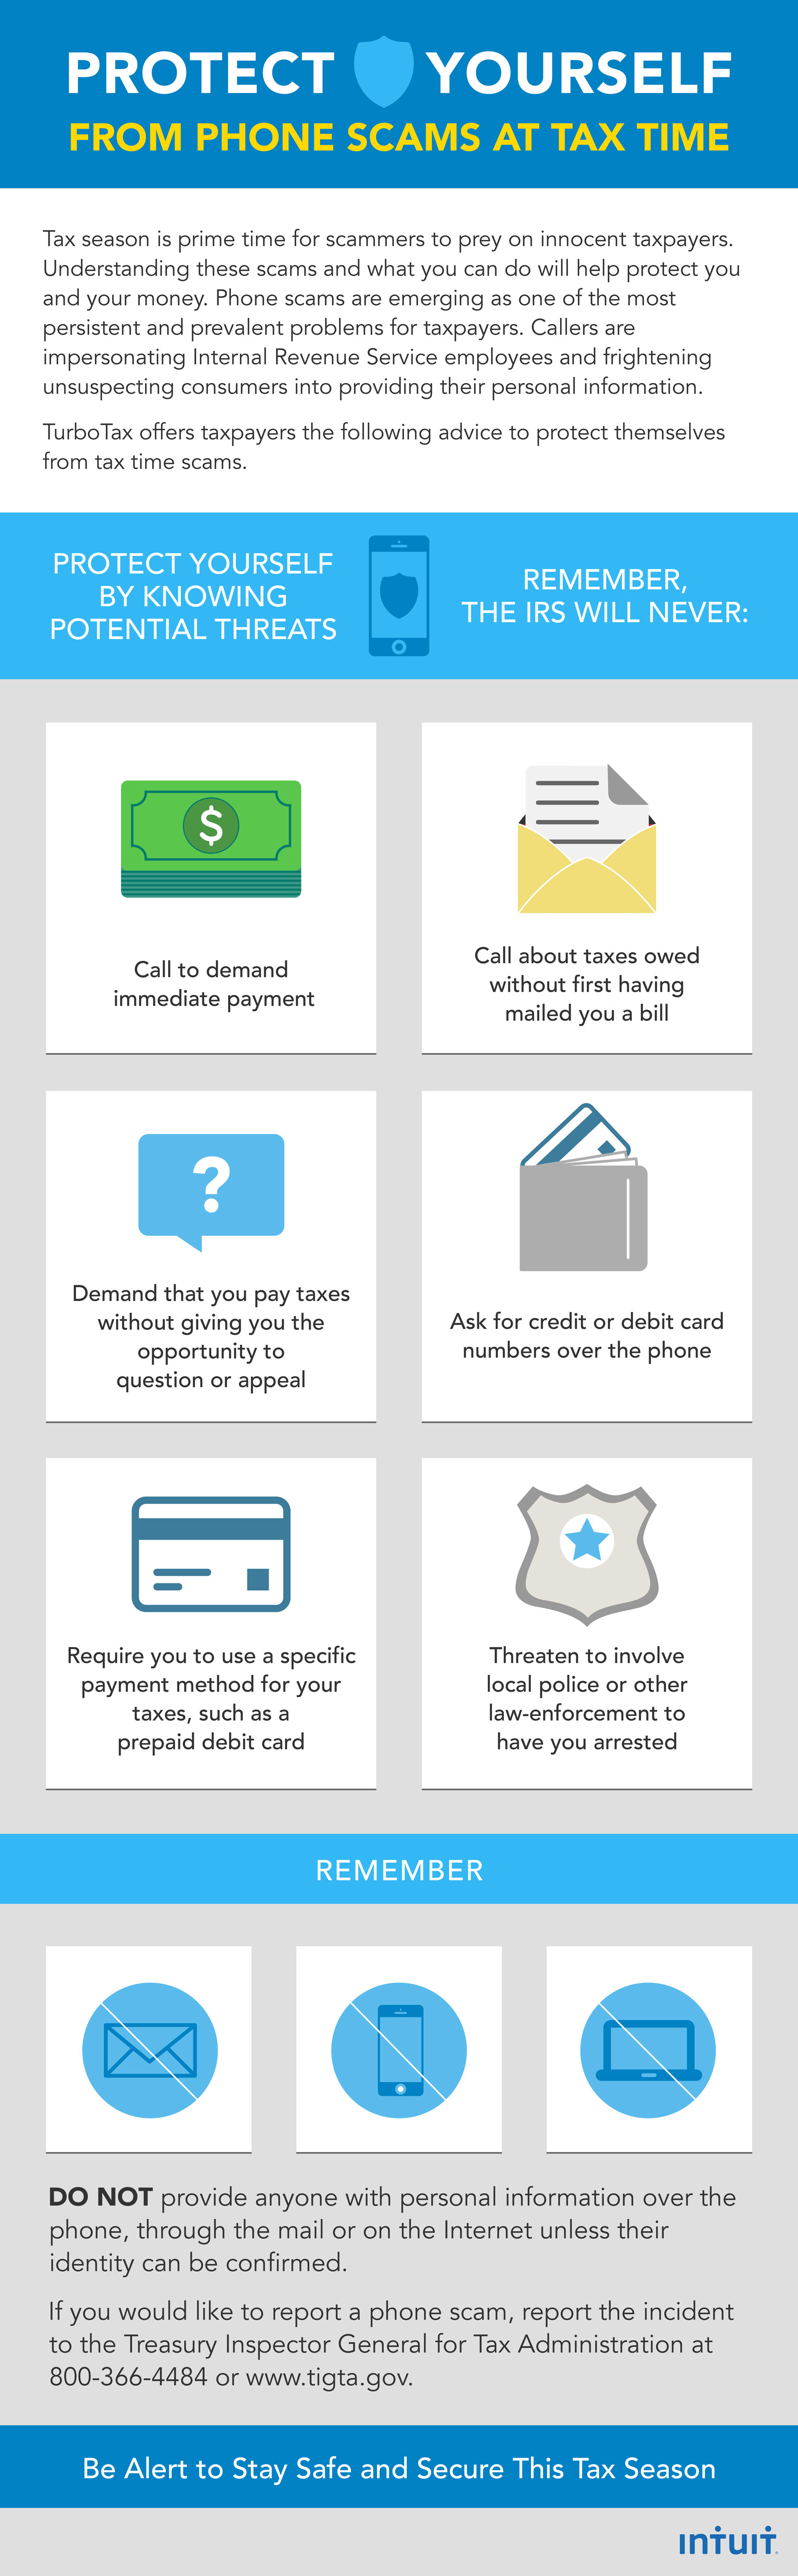 Intuit-Scams-infographic_3-13-15